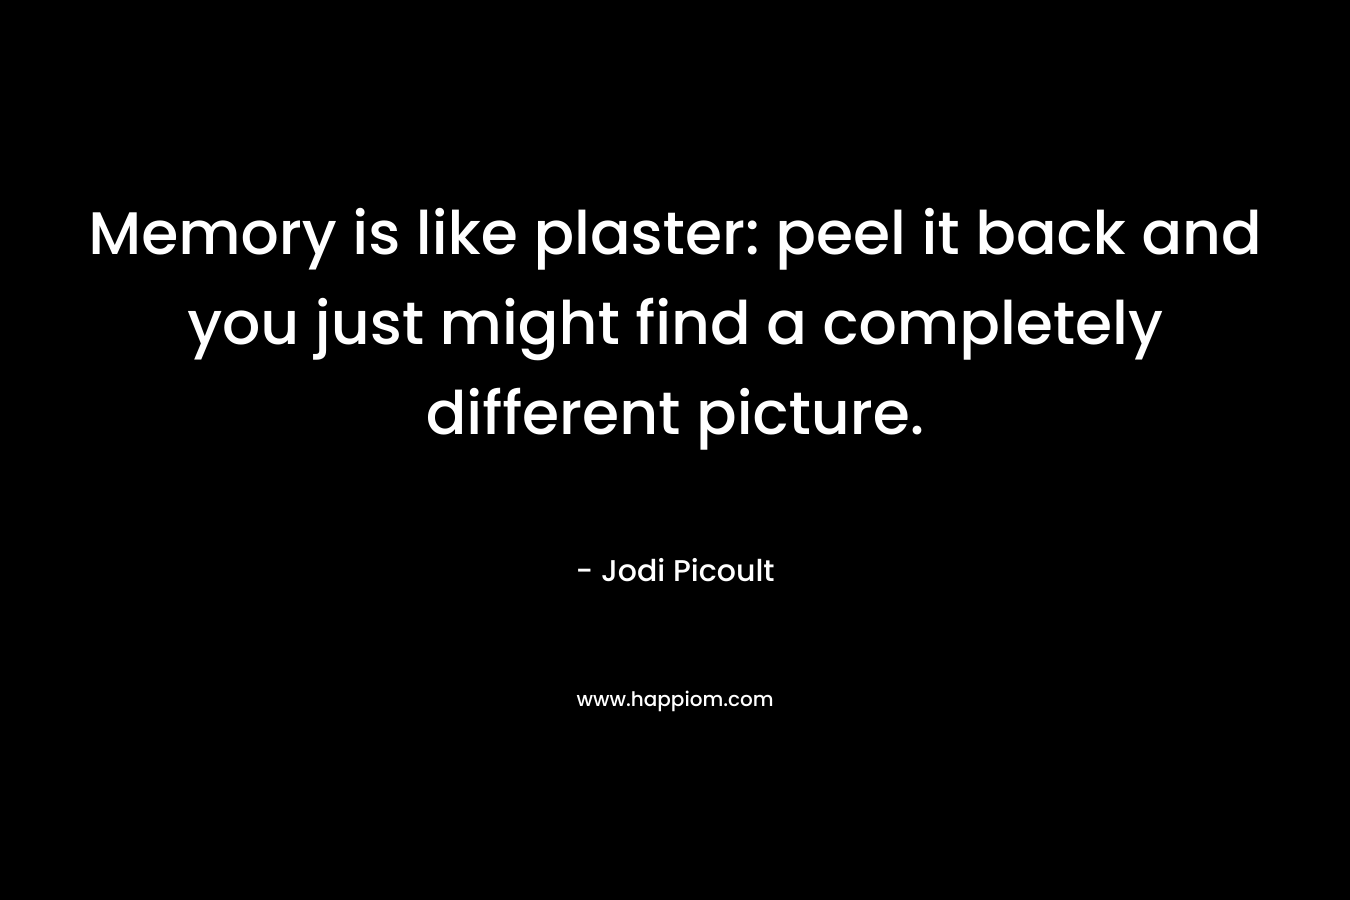 Memory is like plaster: peel it back and you just might find a completely different picture. – Jodi Picoult